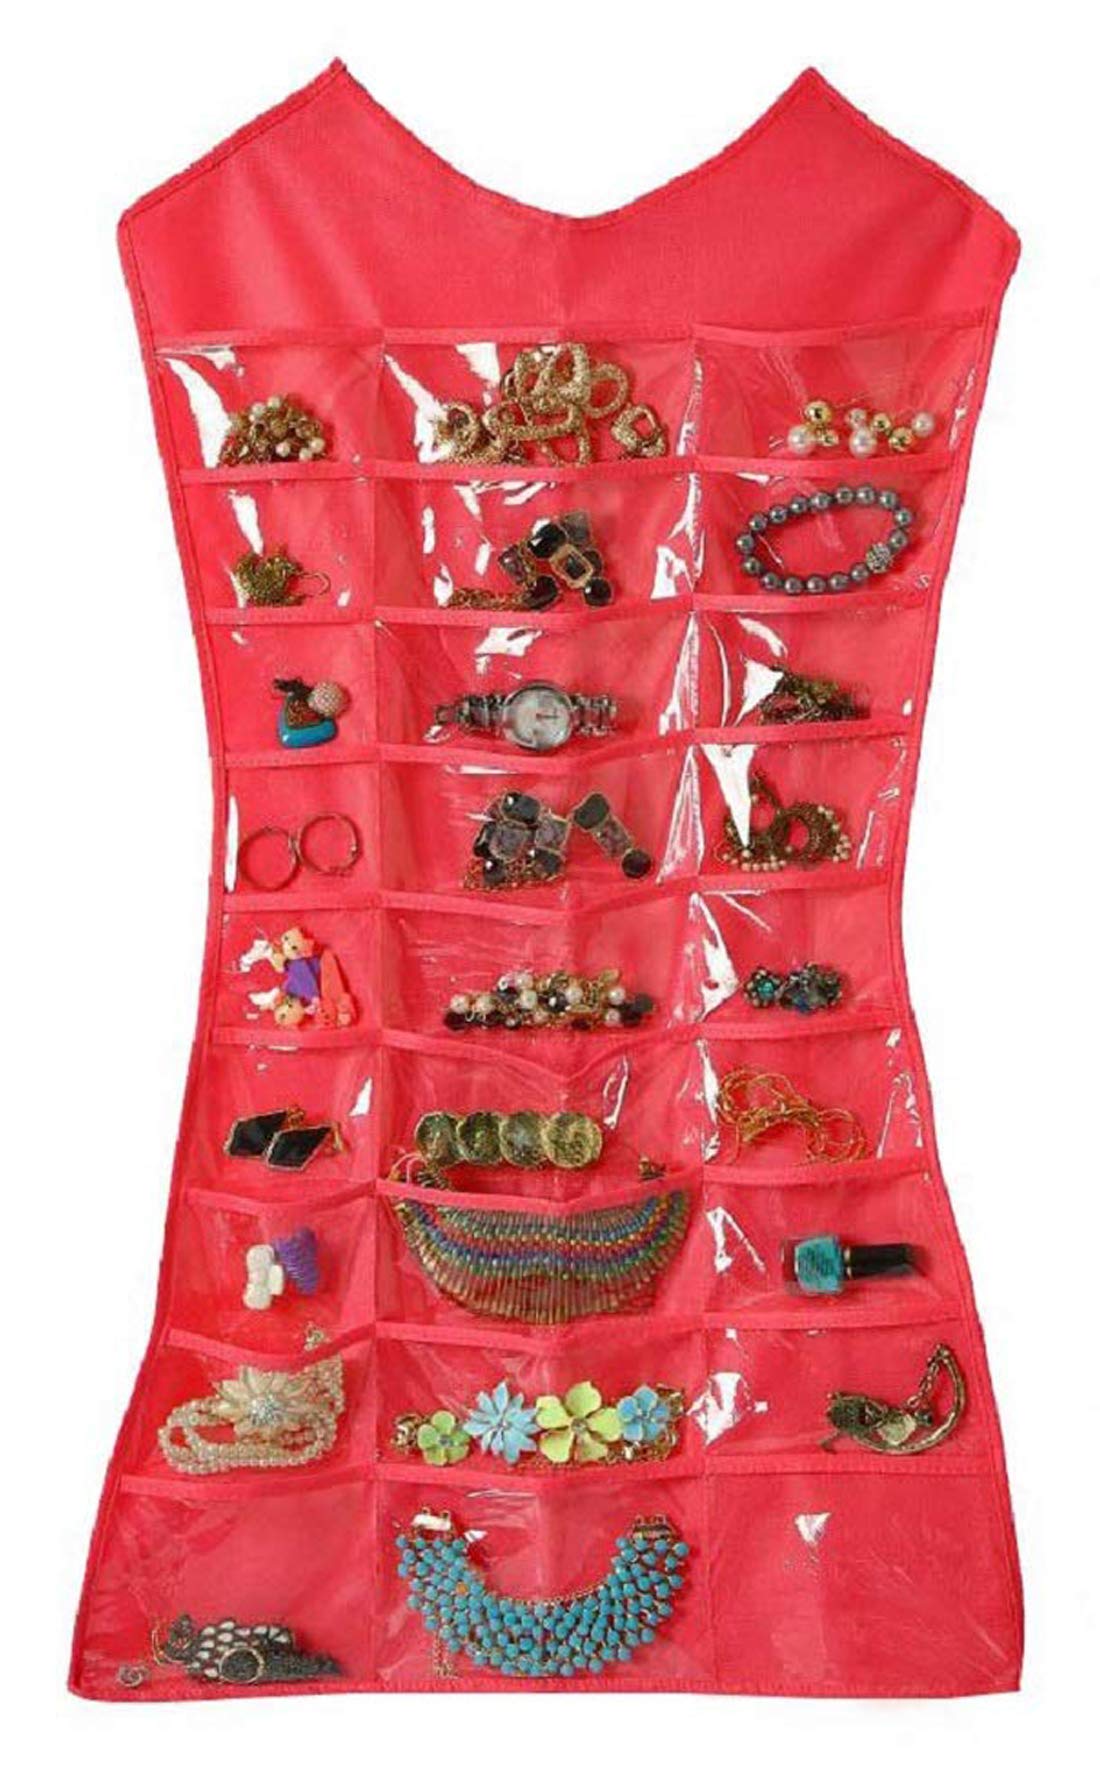 Kuber Industries Hanging Jewellery Organizer|Transparent Pockets & Waterproof PVC Material|Upto 27 Pockets, Size 81 x 40 CM (Pink)